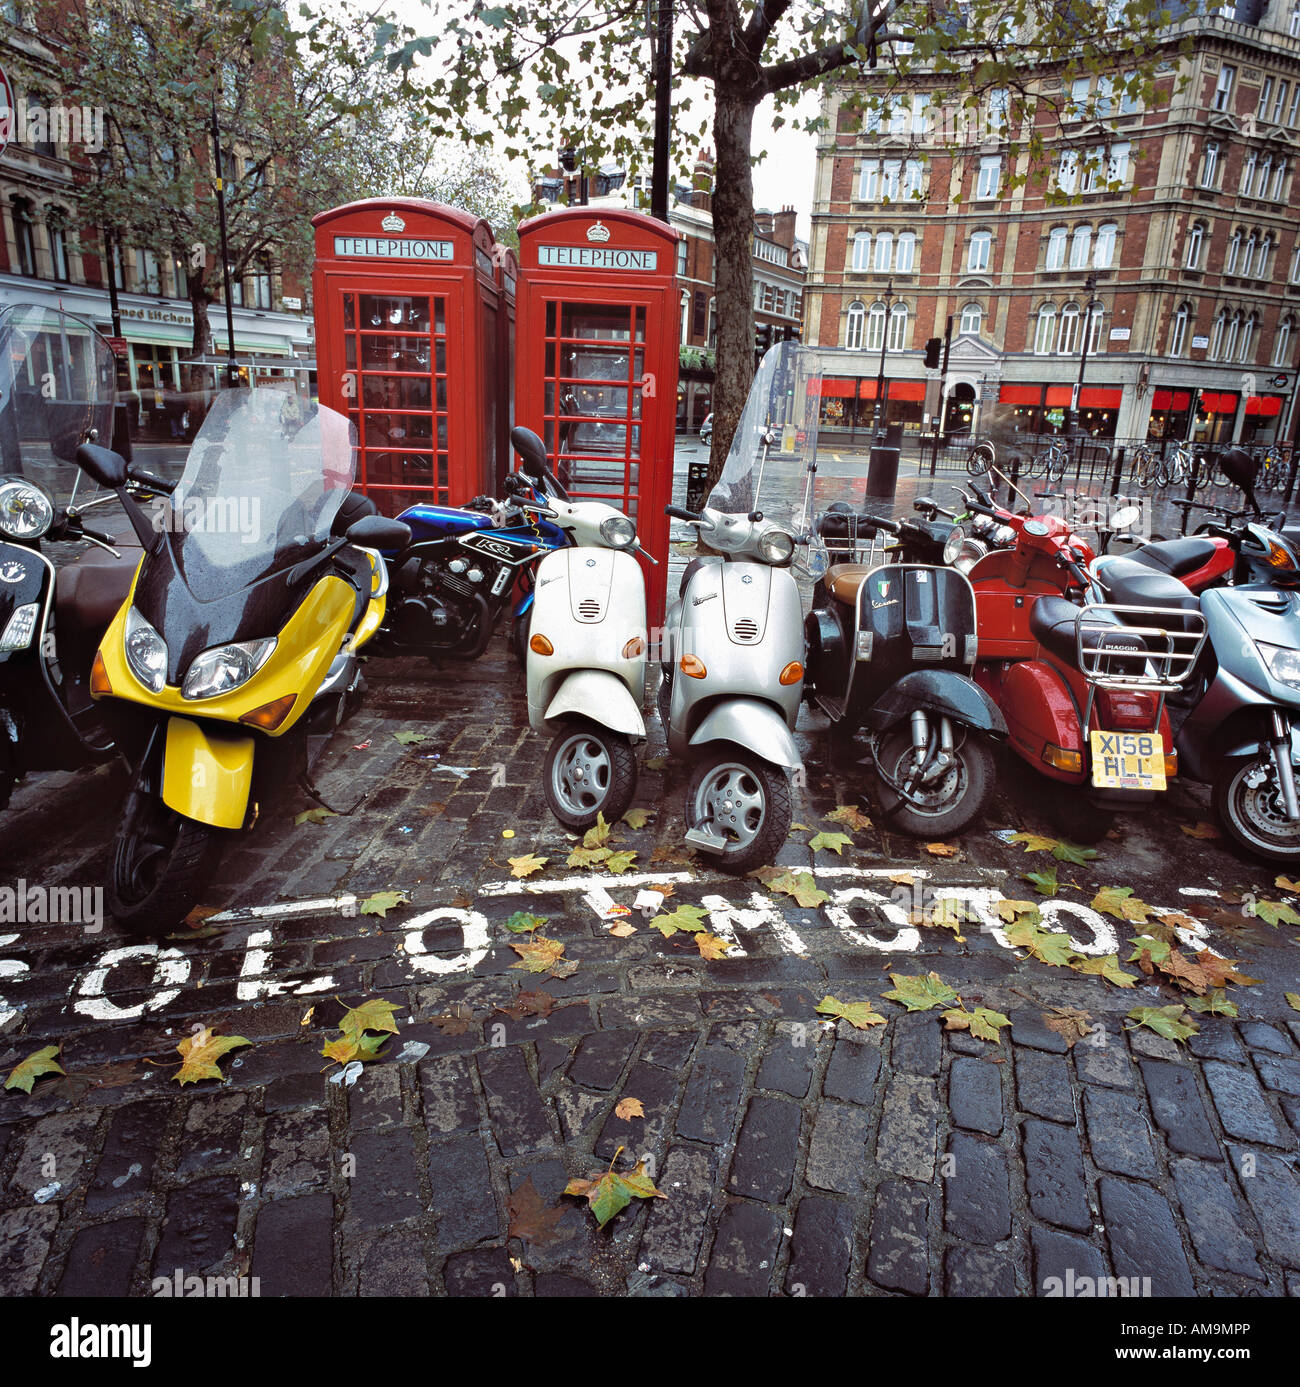 Parked motorbikes and scooters by phone booths in London. Stock Photo